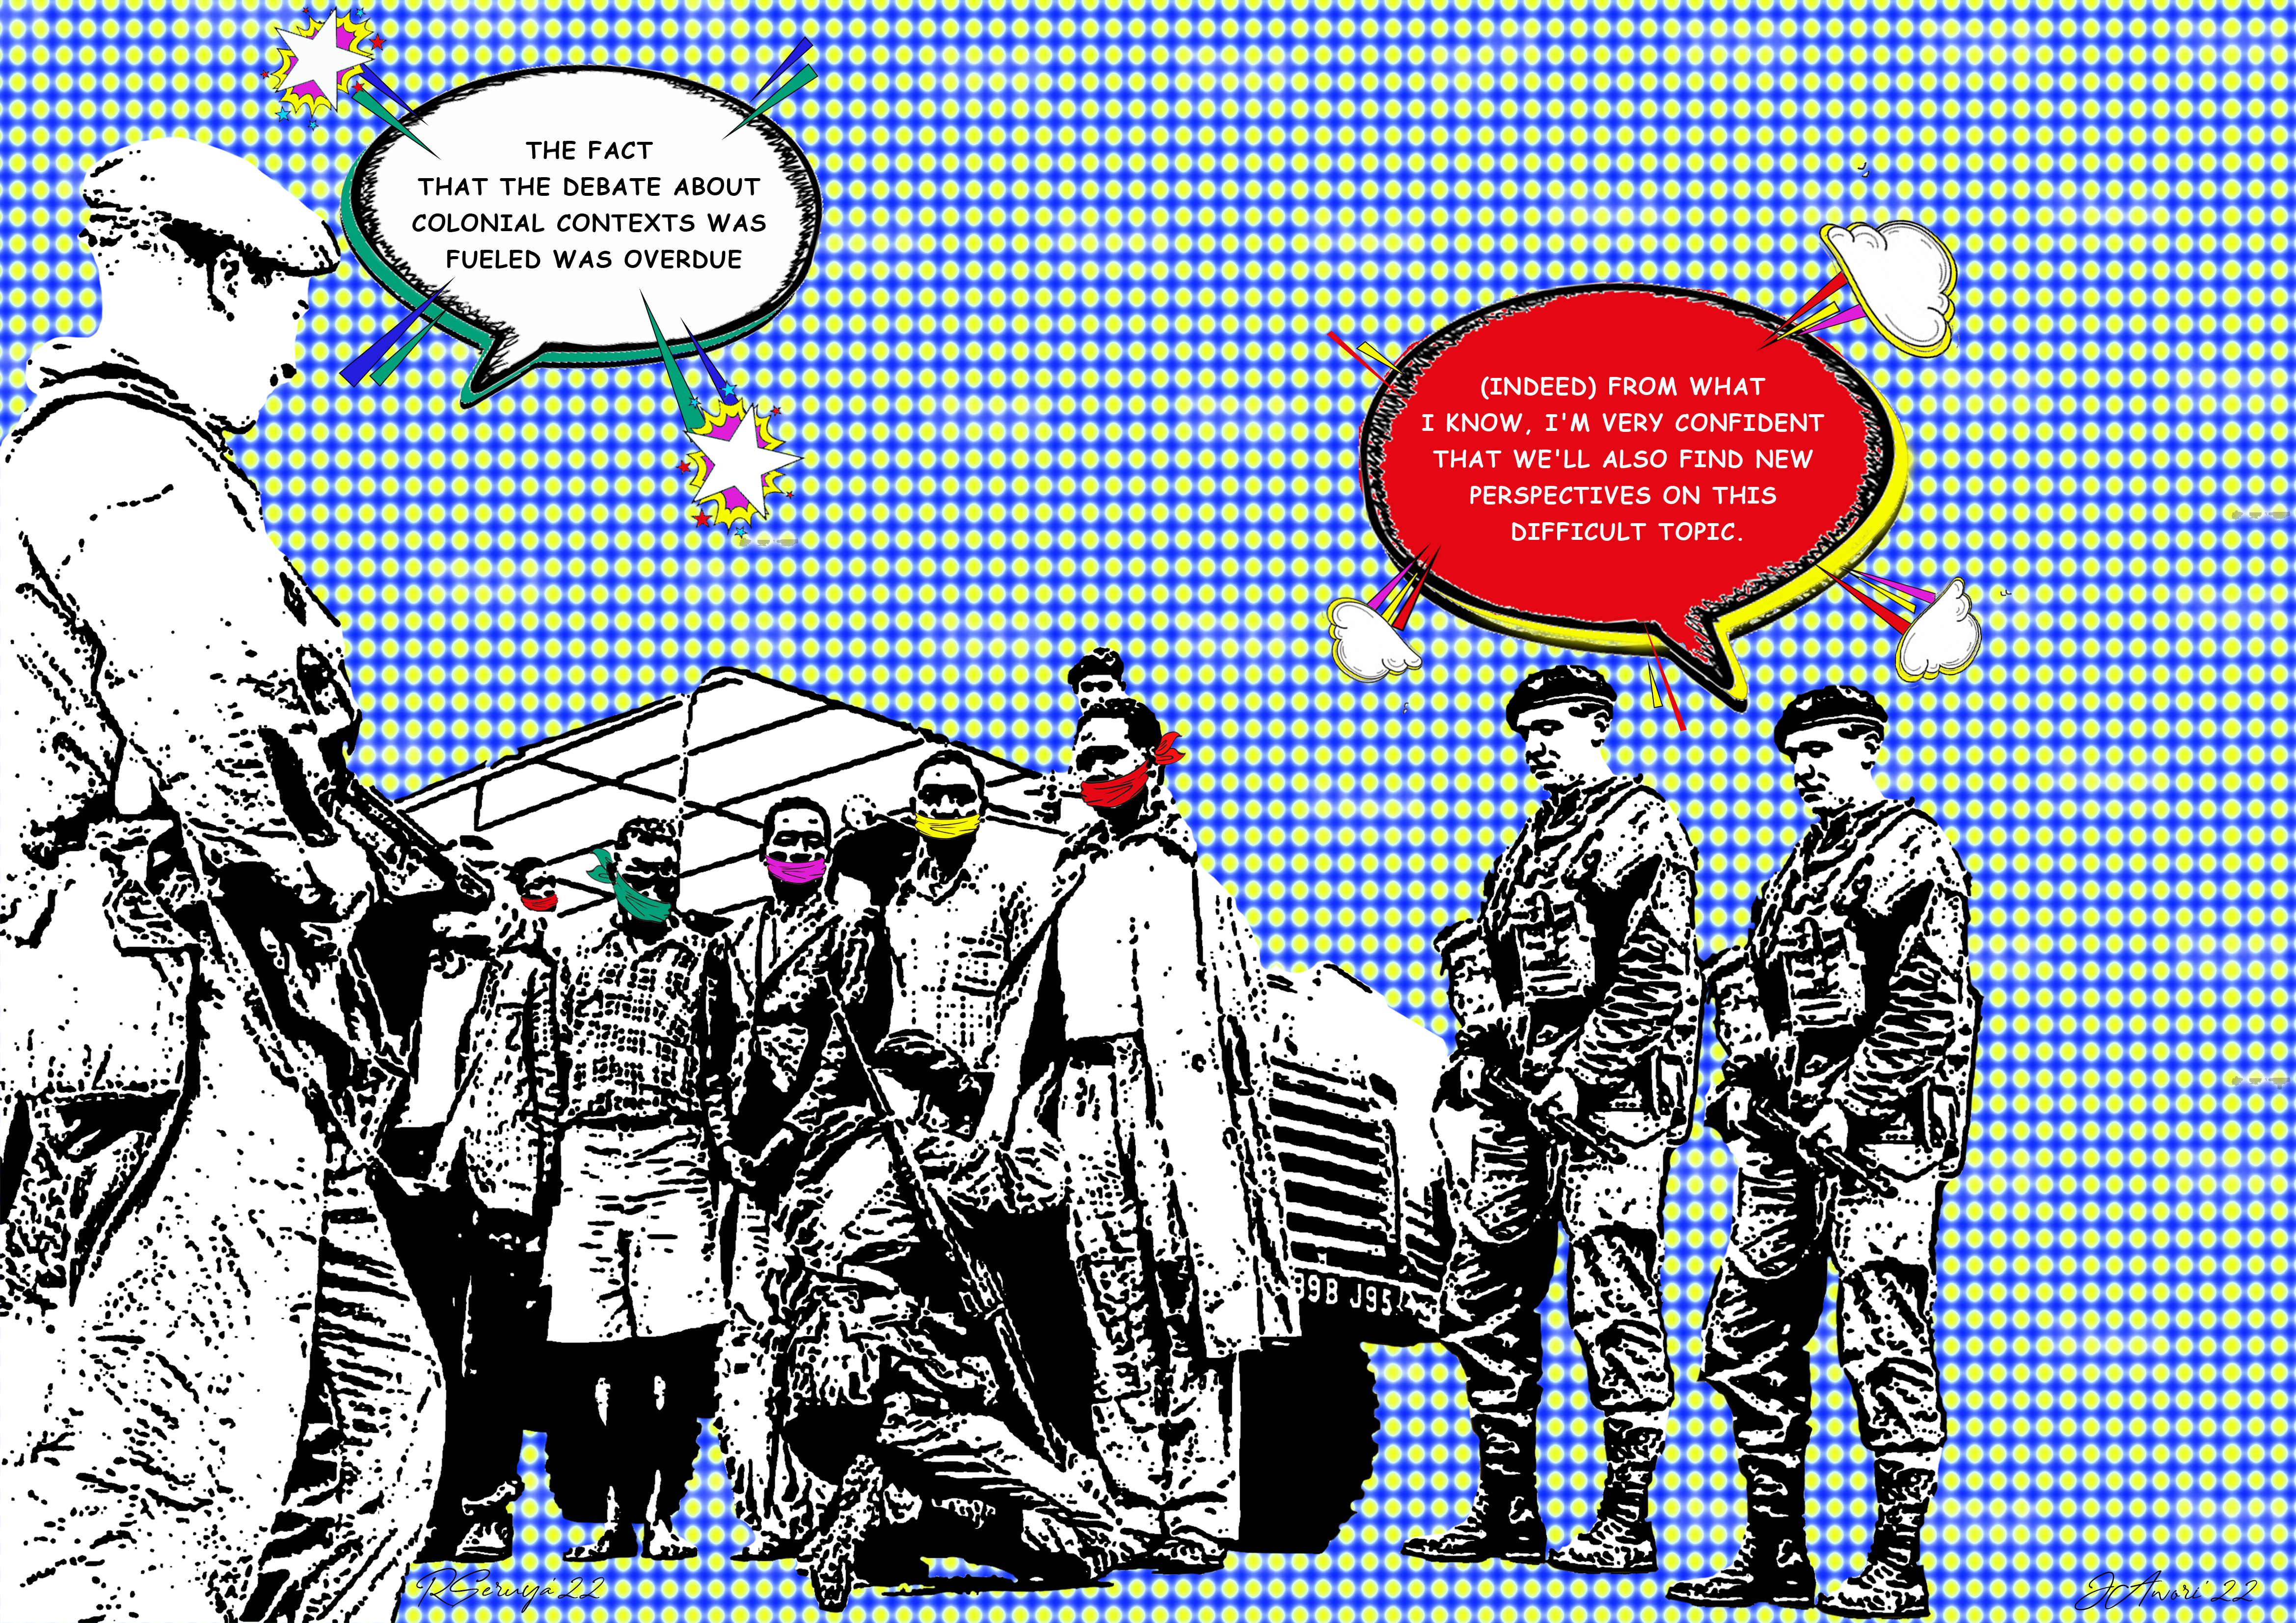 One-way conversation 3 (Image used: British soldiers inspecting the MauMau in Kenya)  (Text used: extract from the article "Berlin's Humboldt Forum launches with unanswered questions"  by Dw.com, quoting German politician Monika Grütters)